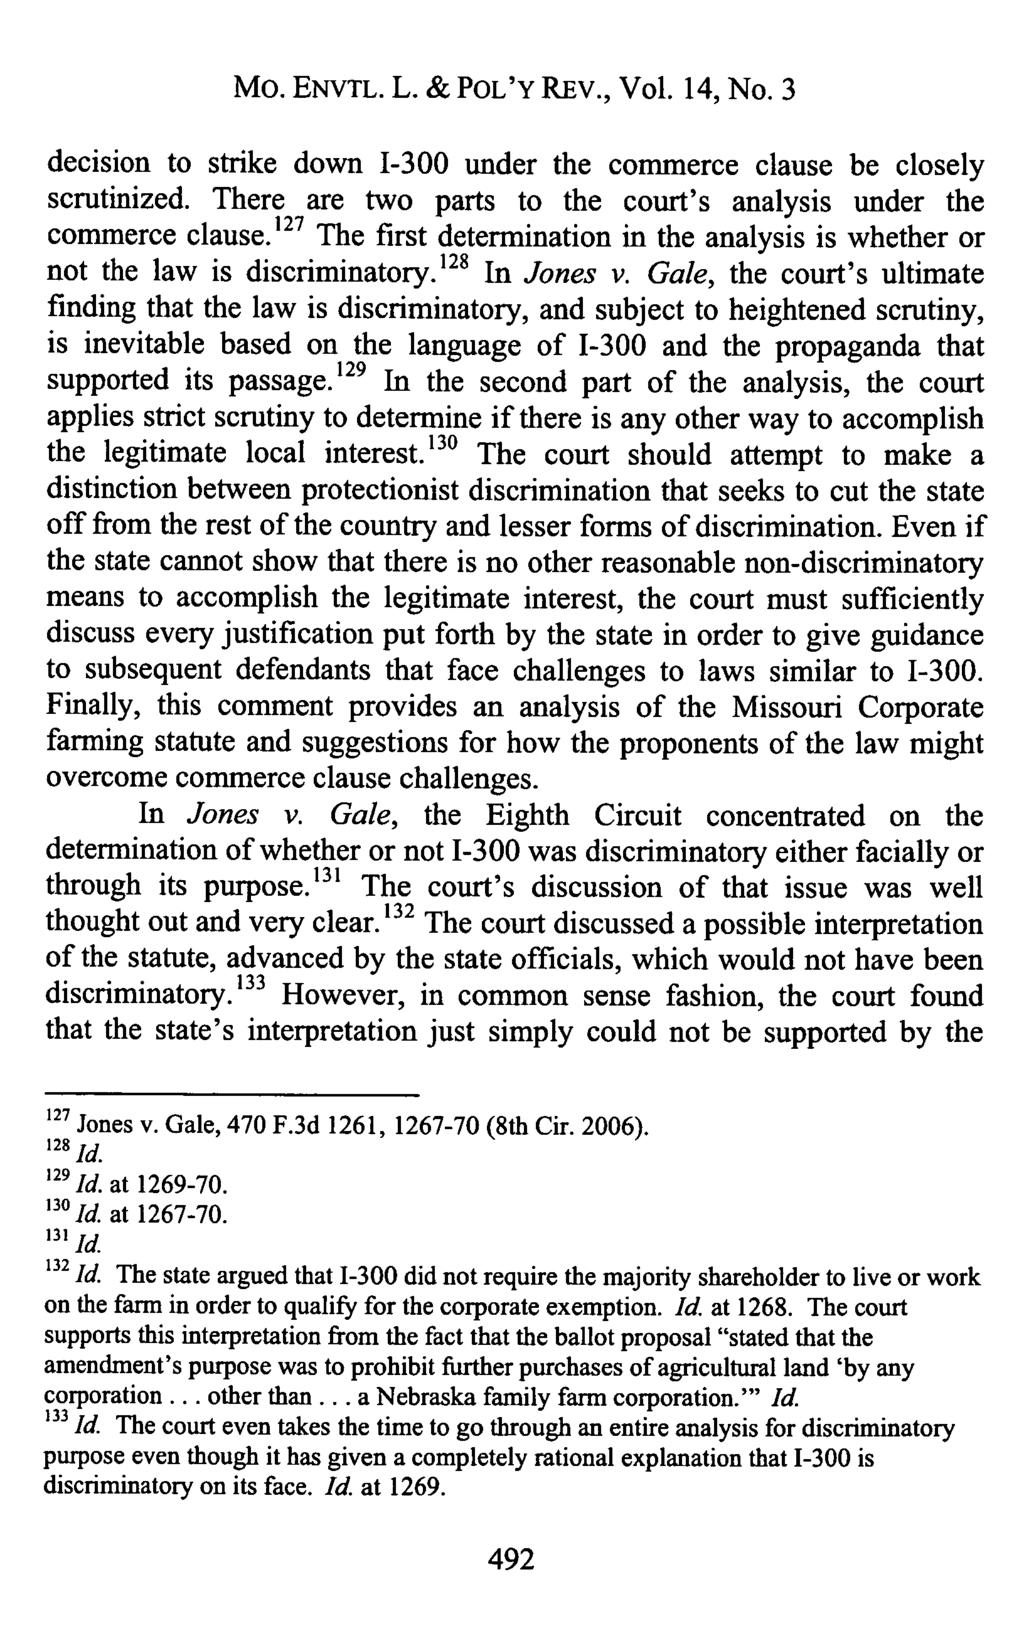 Mo. ENVTL. L. & POL'Y REV., Vol. 14, No. 3 decision to strike down 1-300 under the commerce clause be closely scrutinized. There are two parts to the court's analysis under the commerce clause.